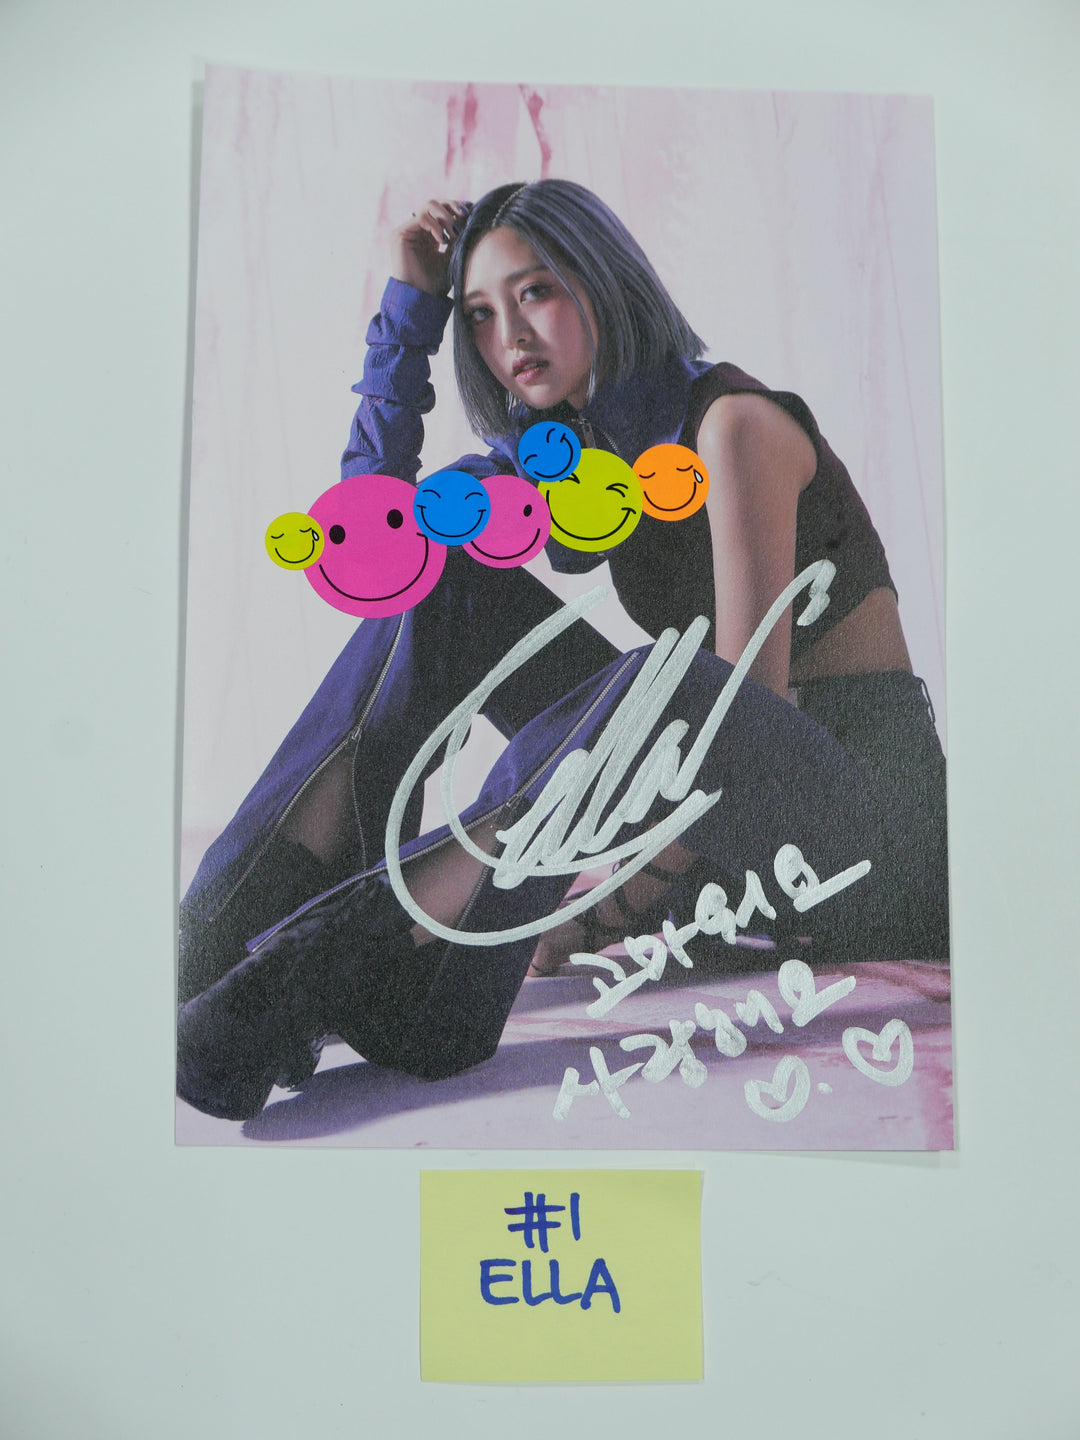 Purple Kiss 'HIDE & SEEK', Pixy 'Temptation'- A Cut Page From Fansign Event Albums